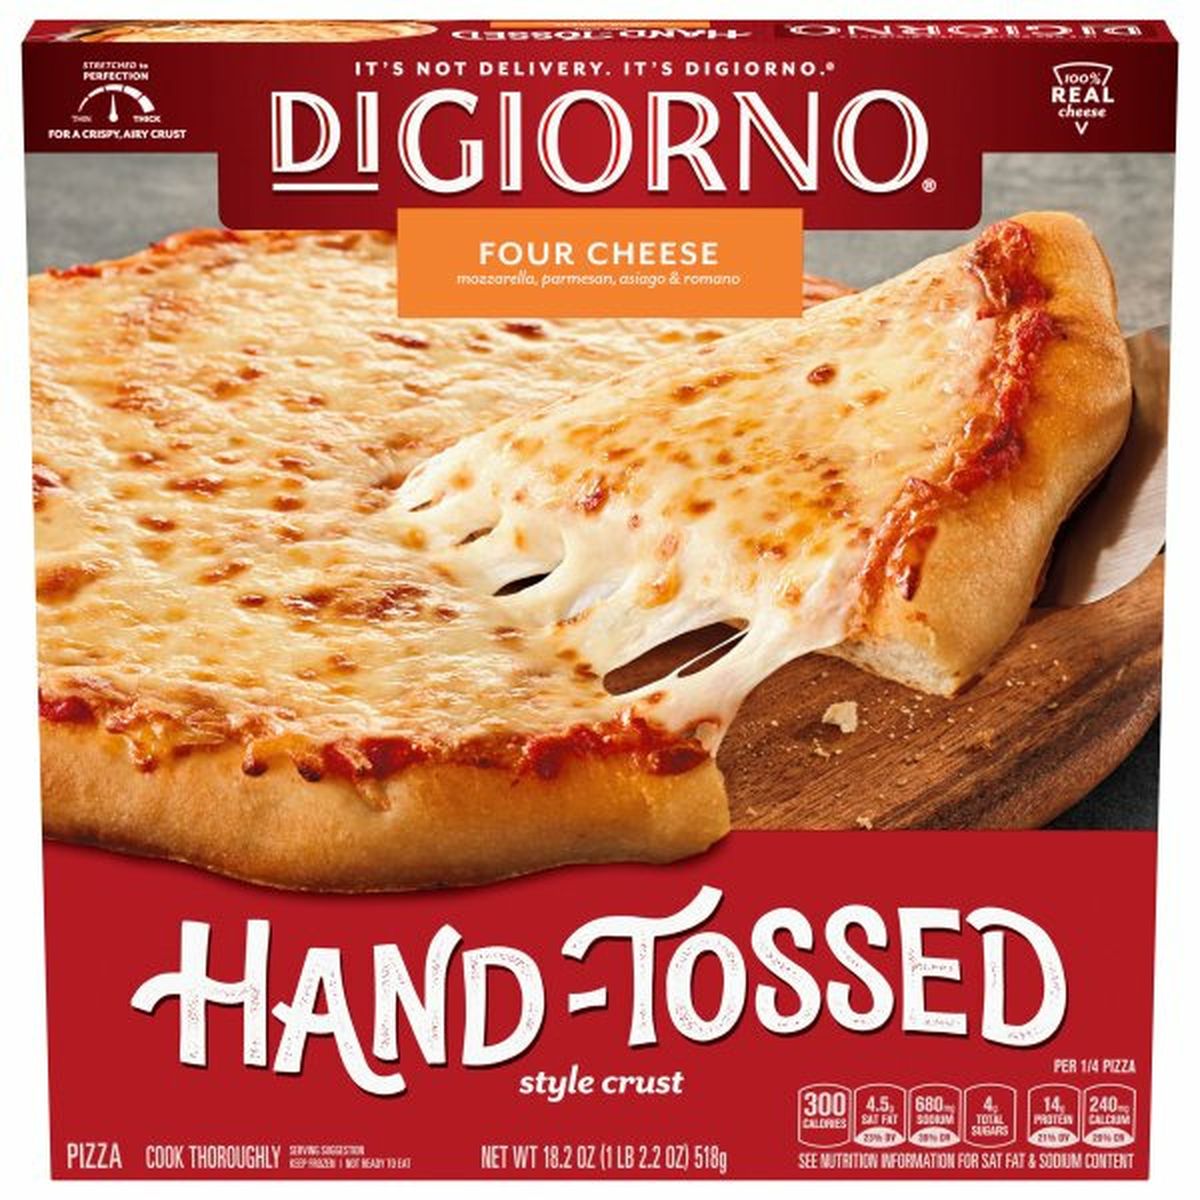 Calories in DiGiorno Pizza, Four Cheese, Hand-Tossed Style Crust